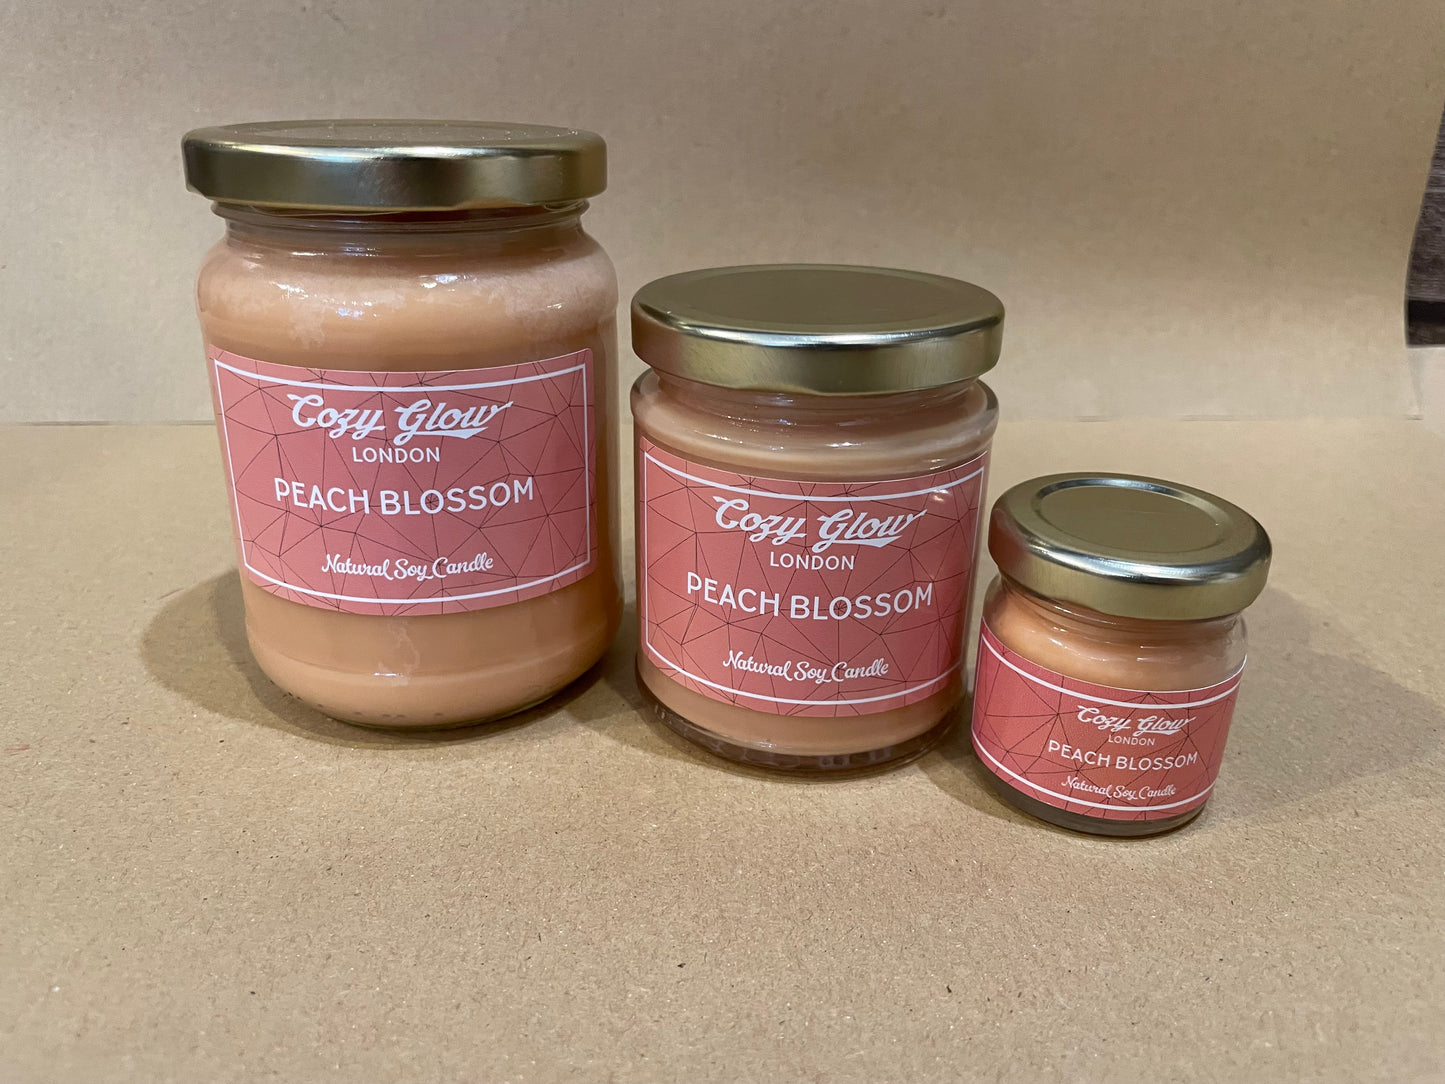 Peach Blossom Soy Candle